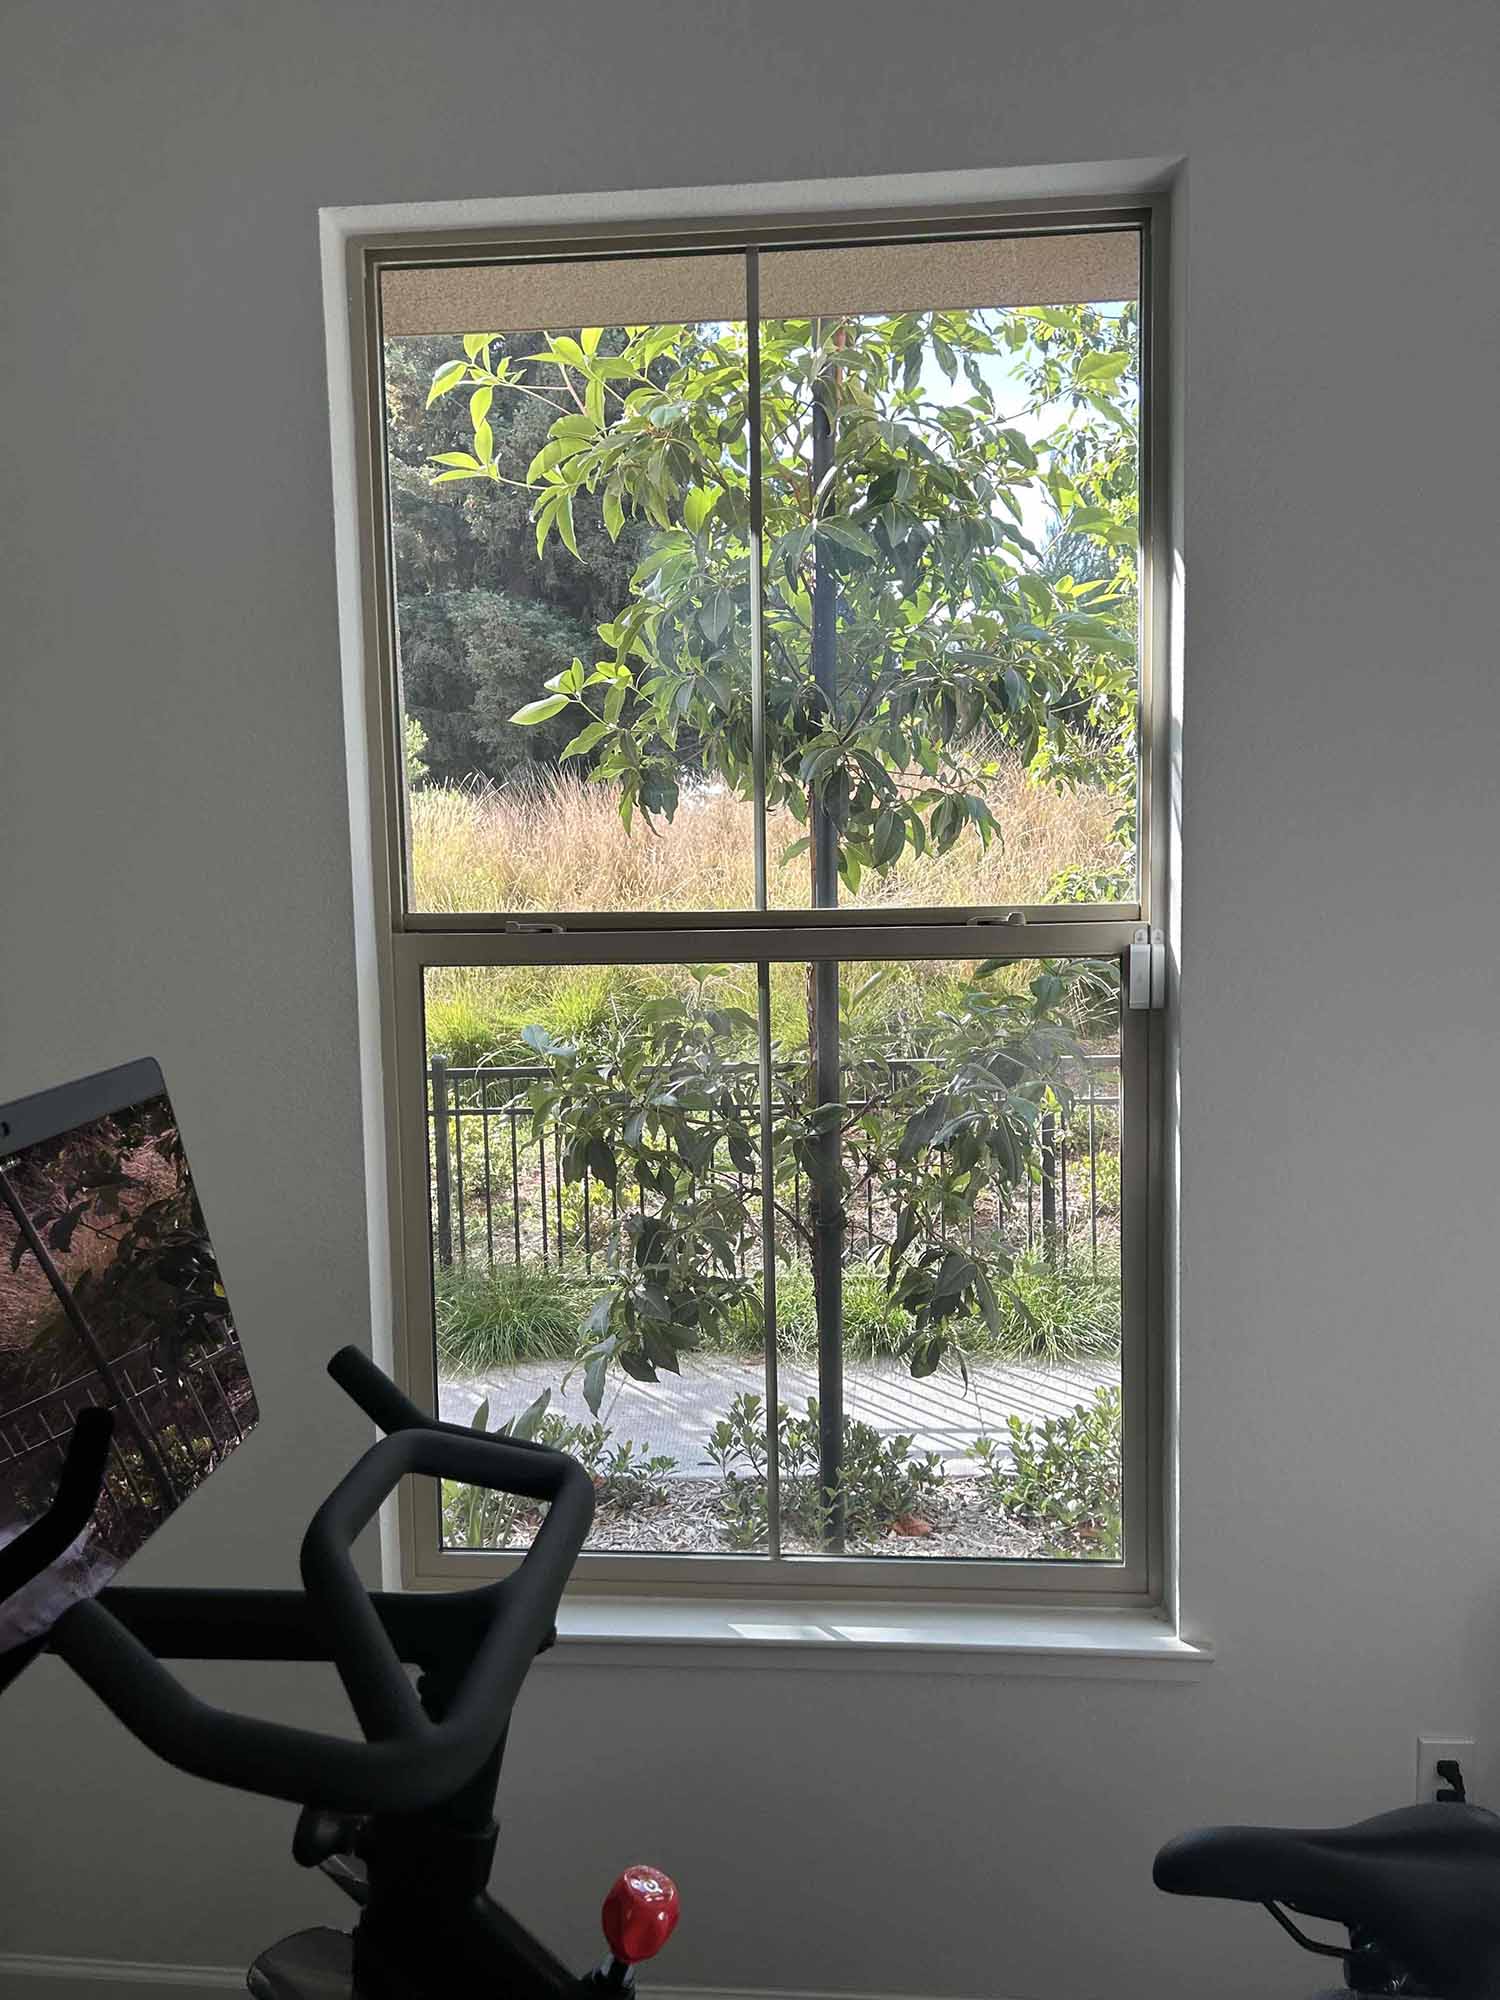 Safety and Sun Control Window Film for Sunnyvale, CA Homes. Installed by ClimatePro.